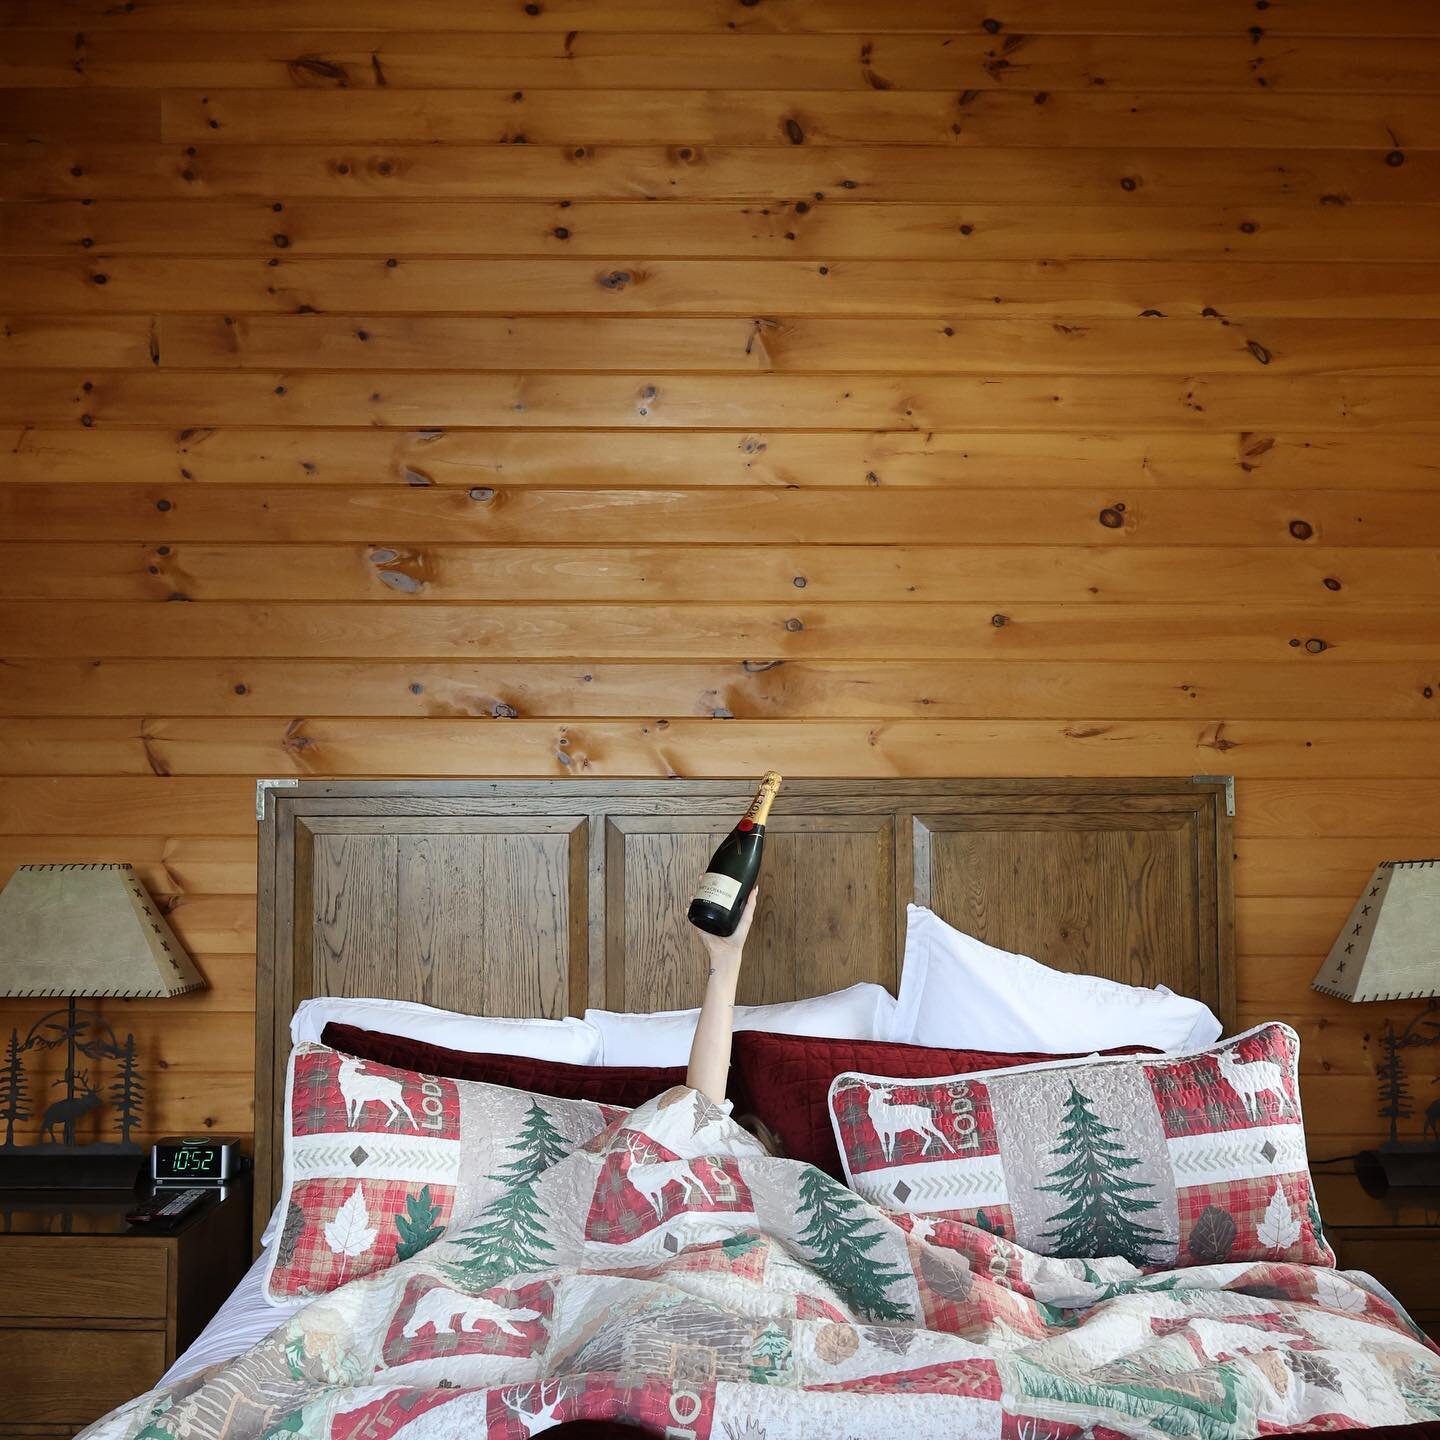 Let&rsquo;s stay in bed&hellip;🍾

Ready to reserve your spot at the lodge? luxebearlodge.com